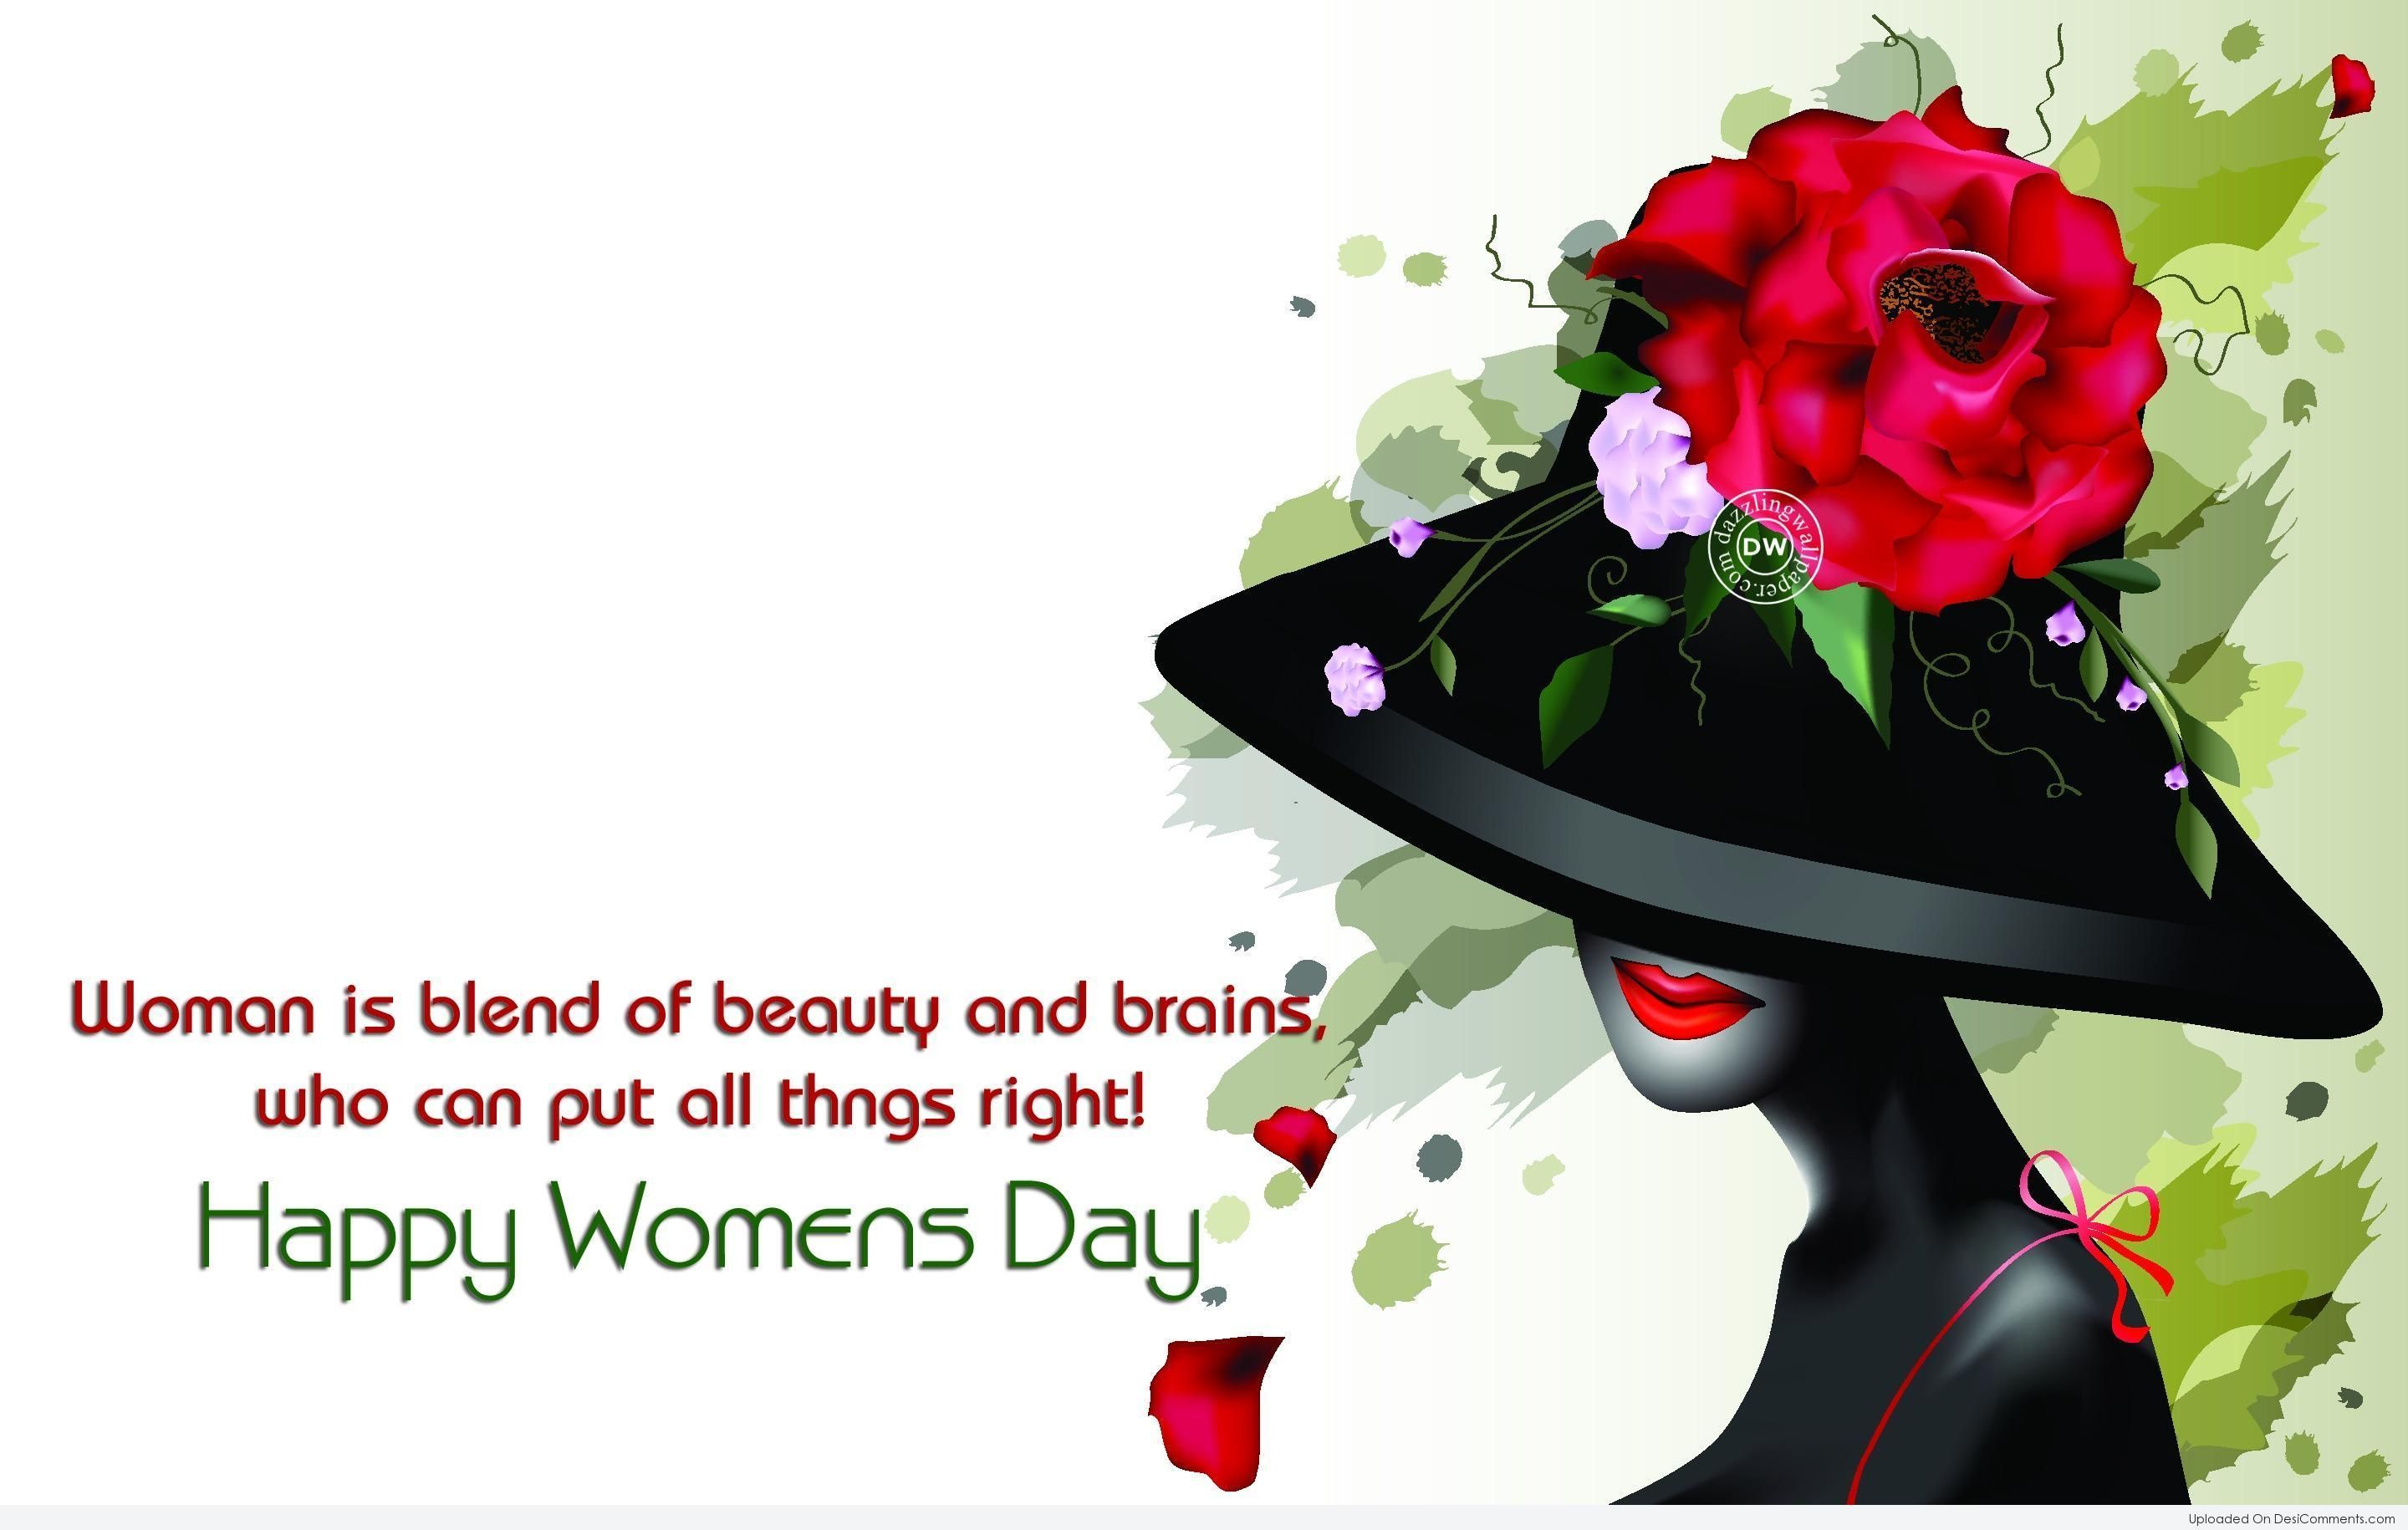 Picture: Woman Is Blend Of Beauty And Brains. Happy Women's Day